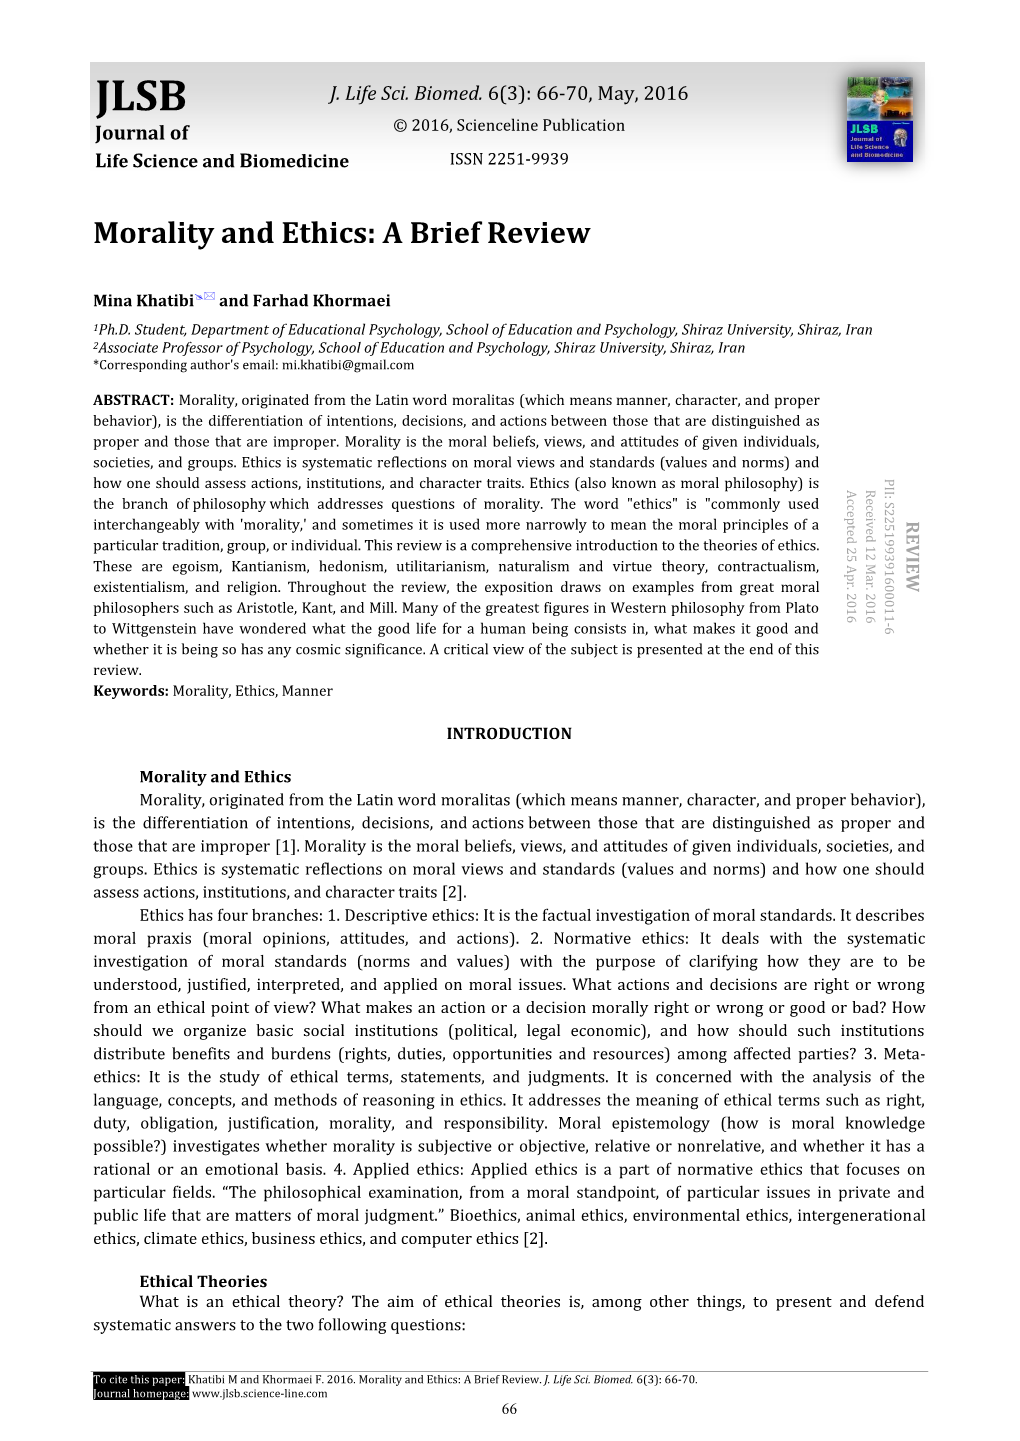 Morality and Ethics: a Brief Review